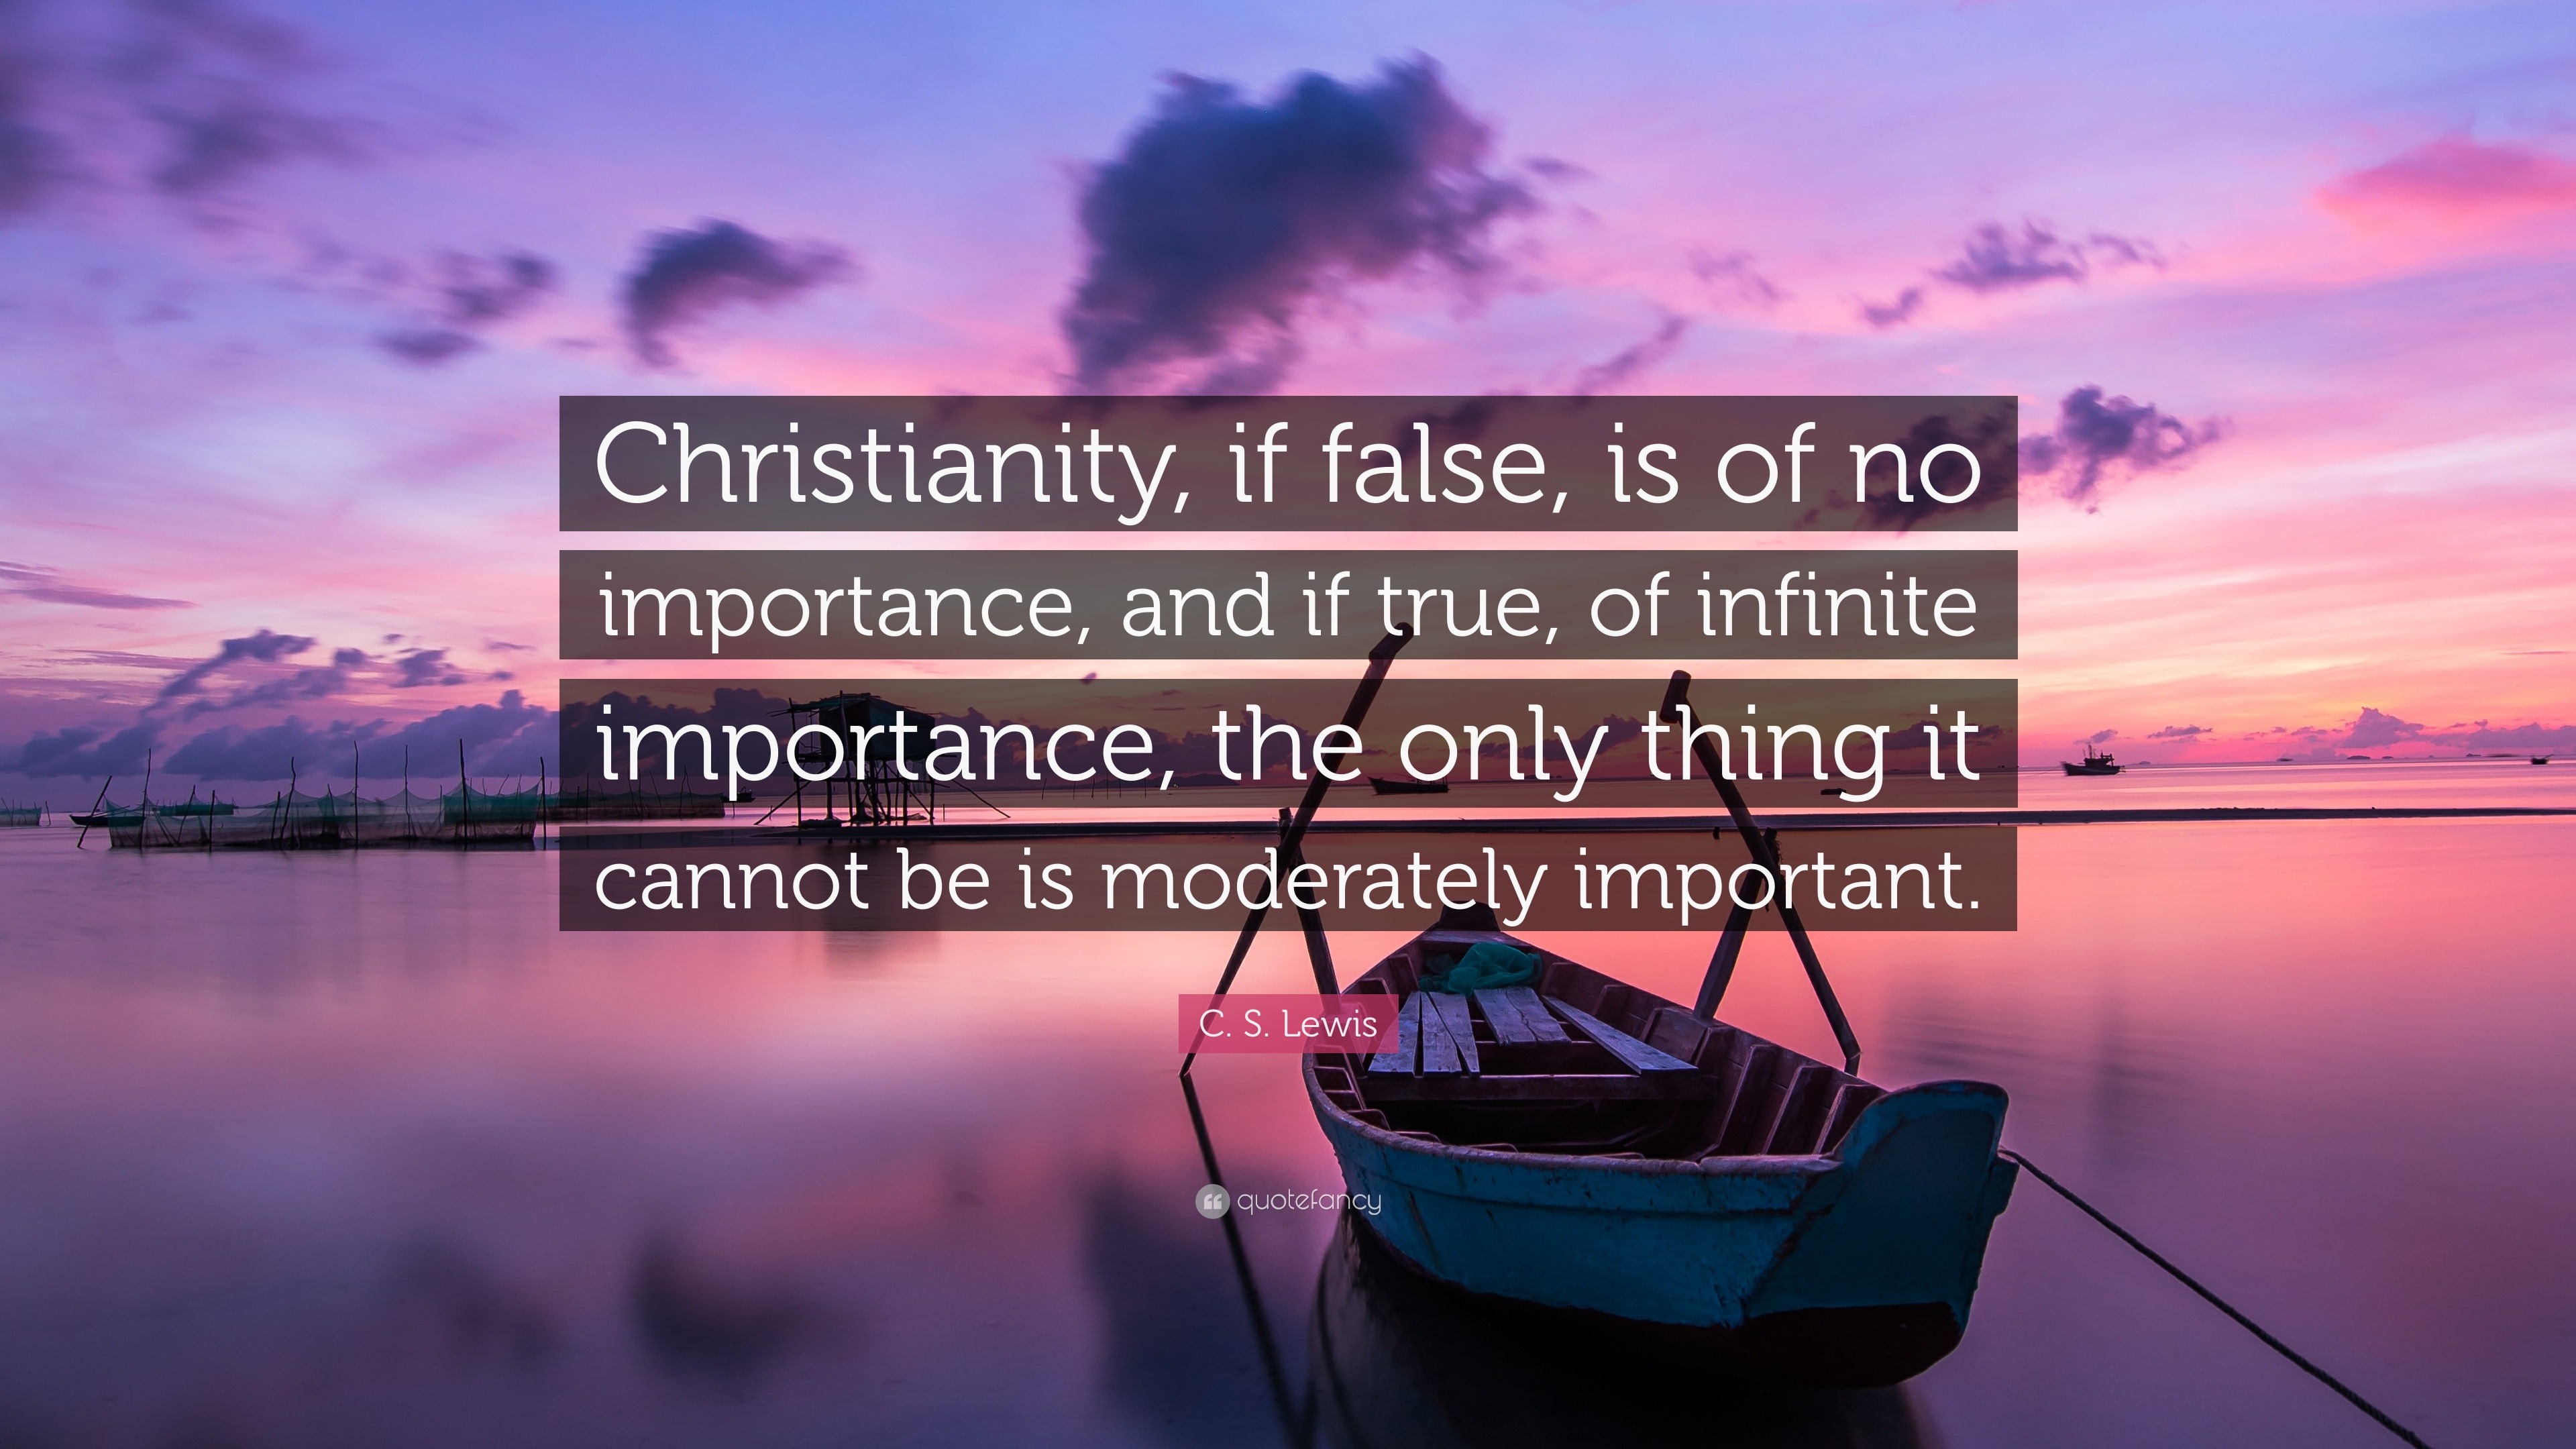 C. S. Lewis Quote: “Christianity, if false, is of no importance, and if